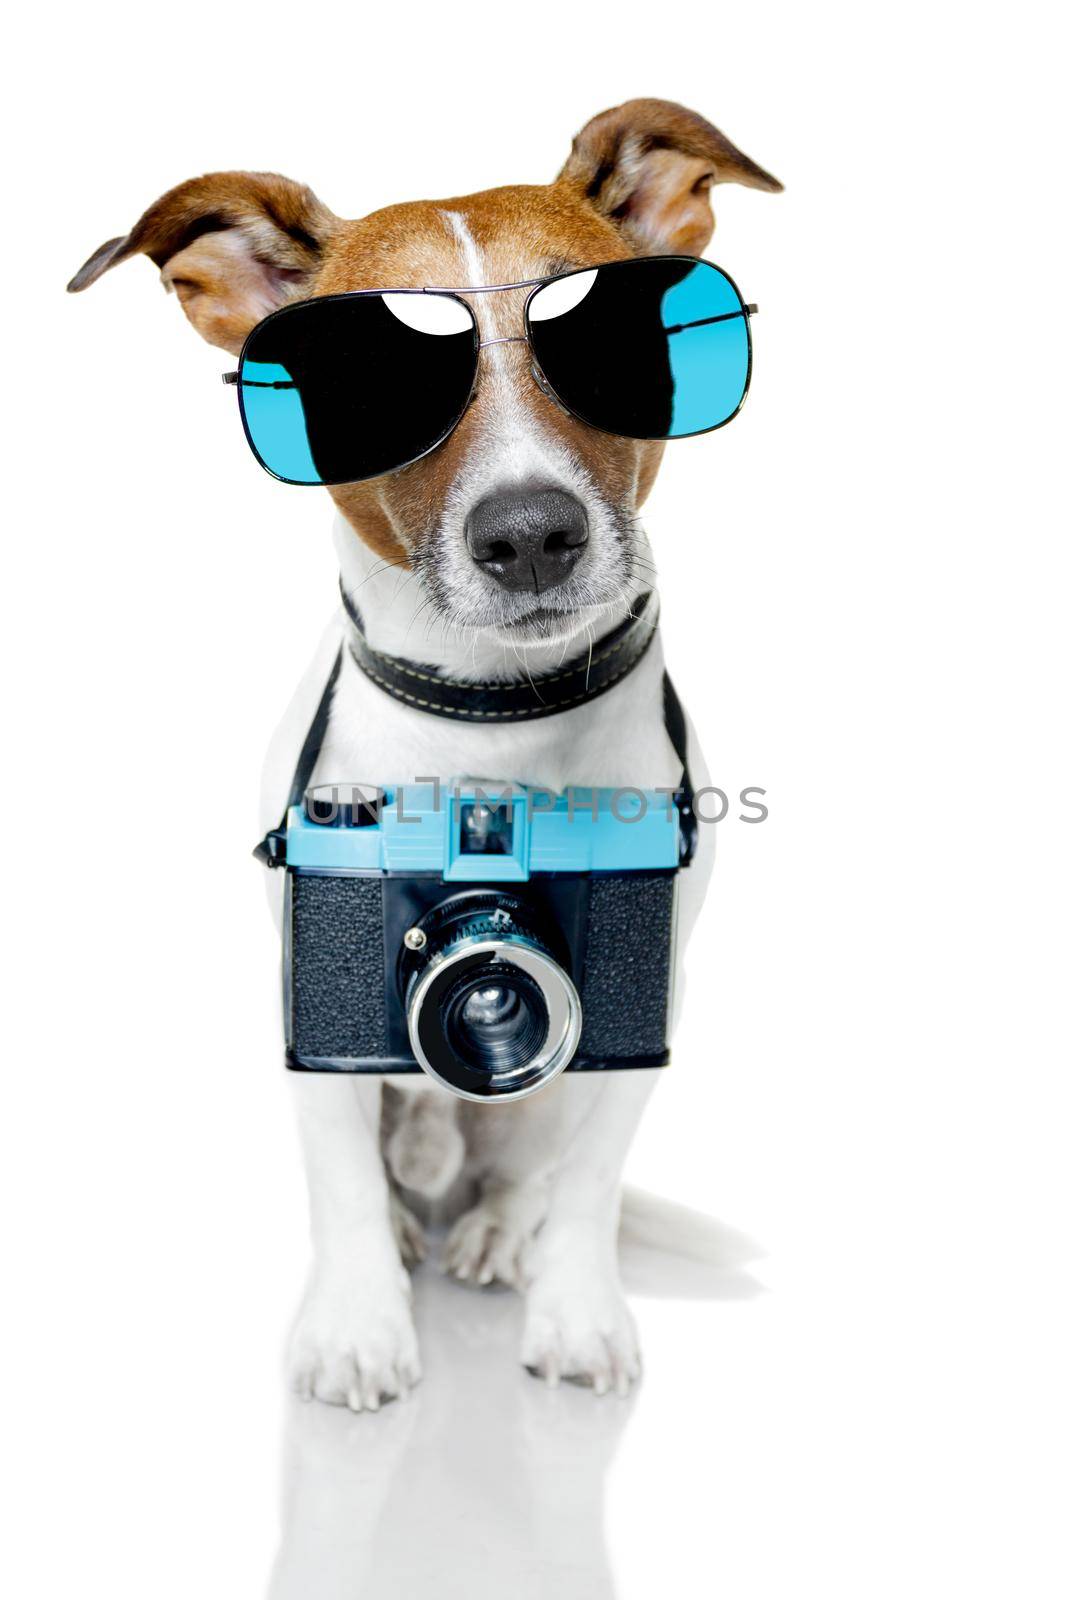 dog taking pictures with a fancy photo camera